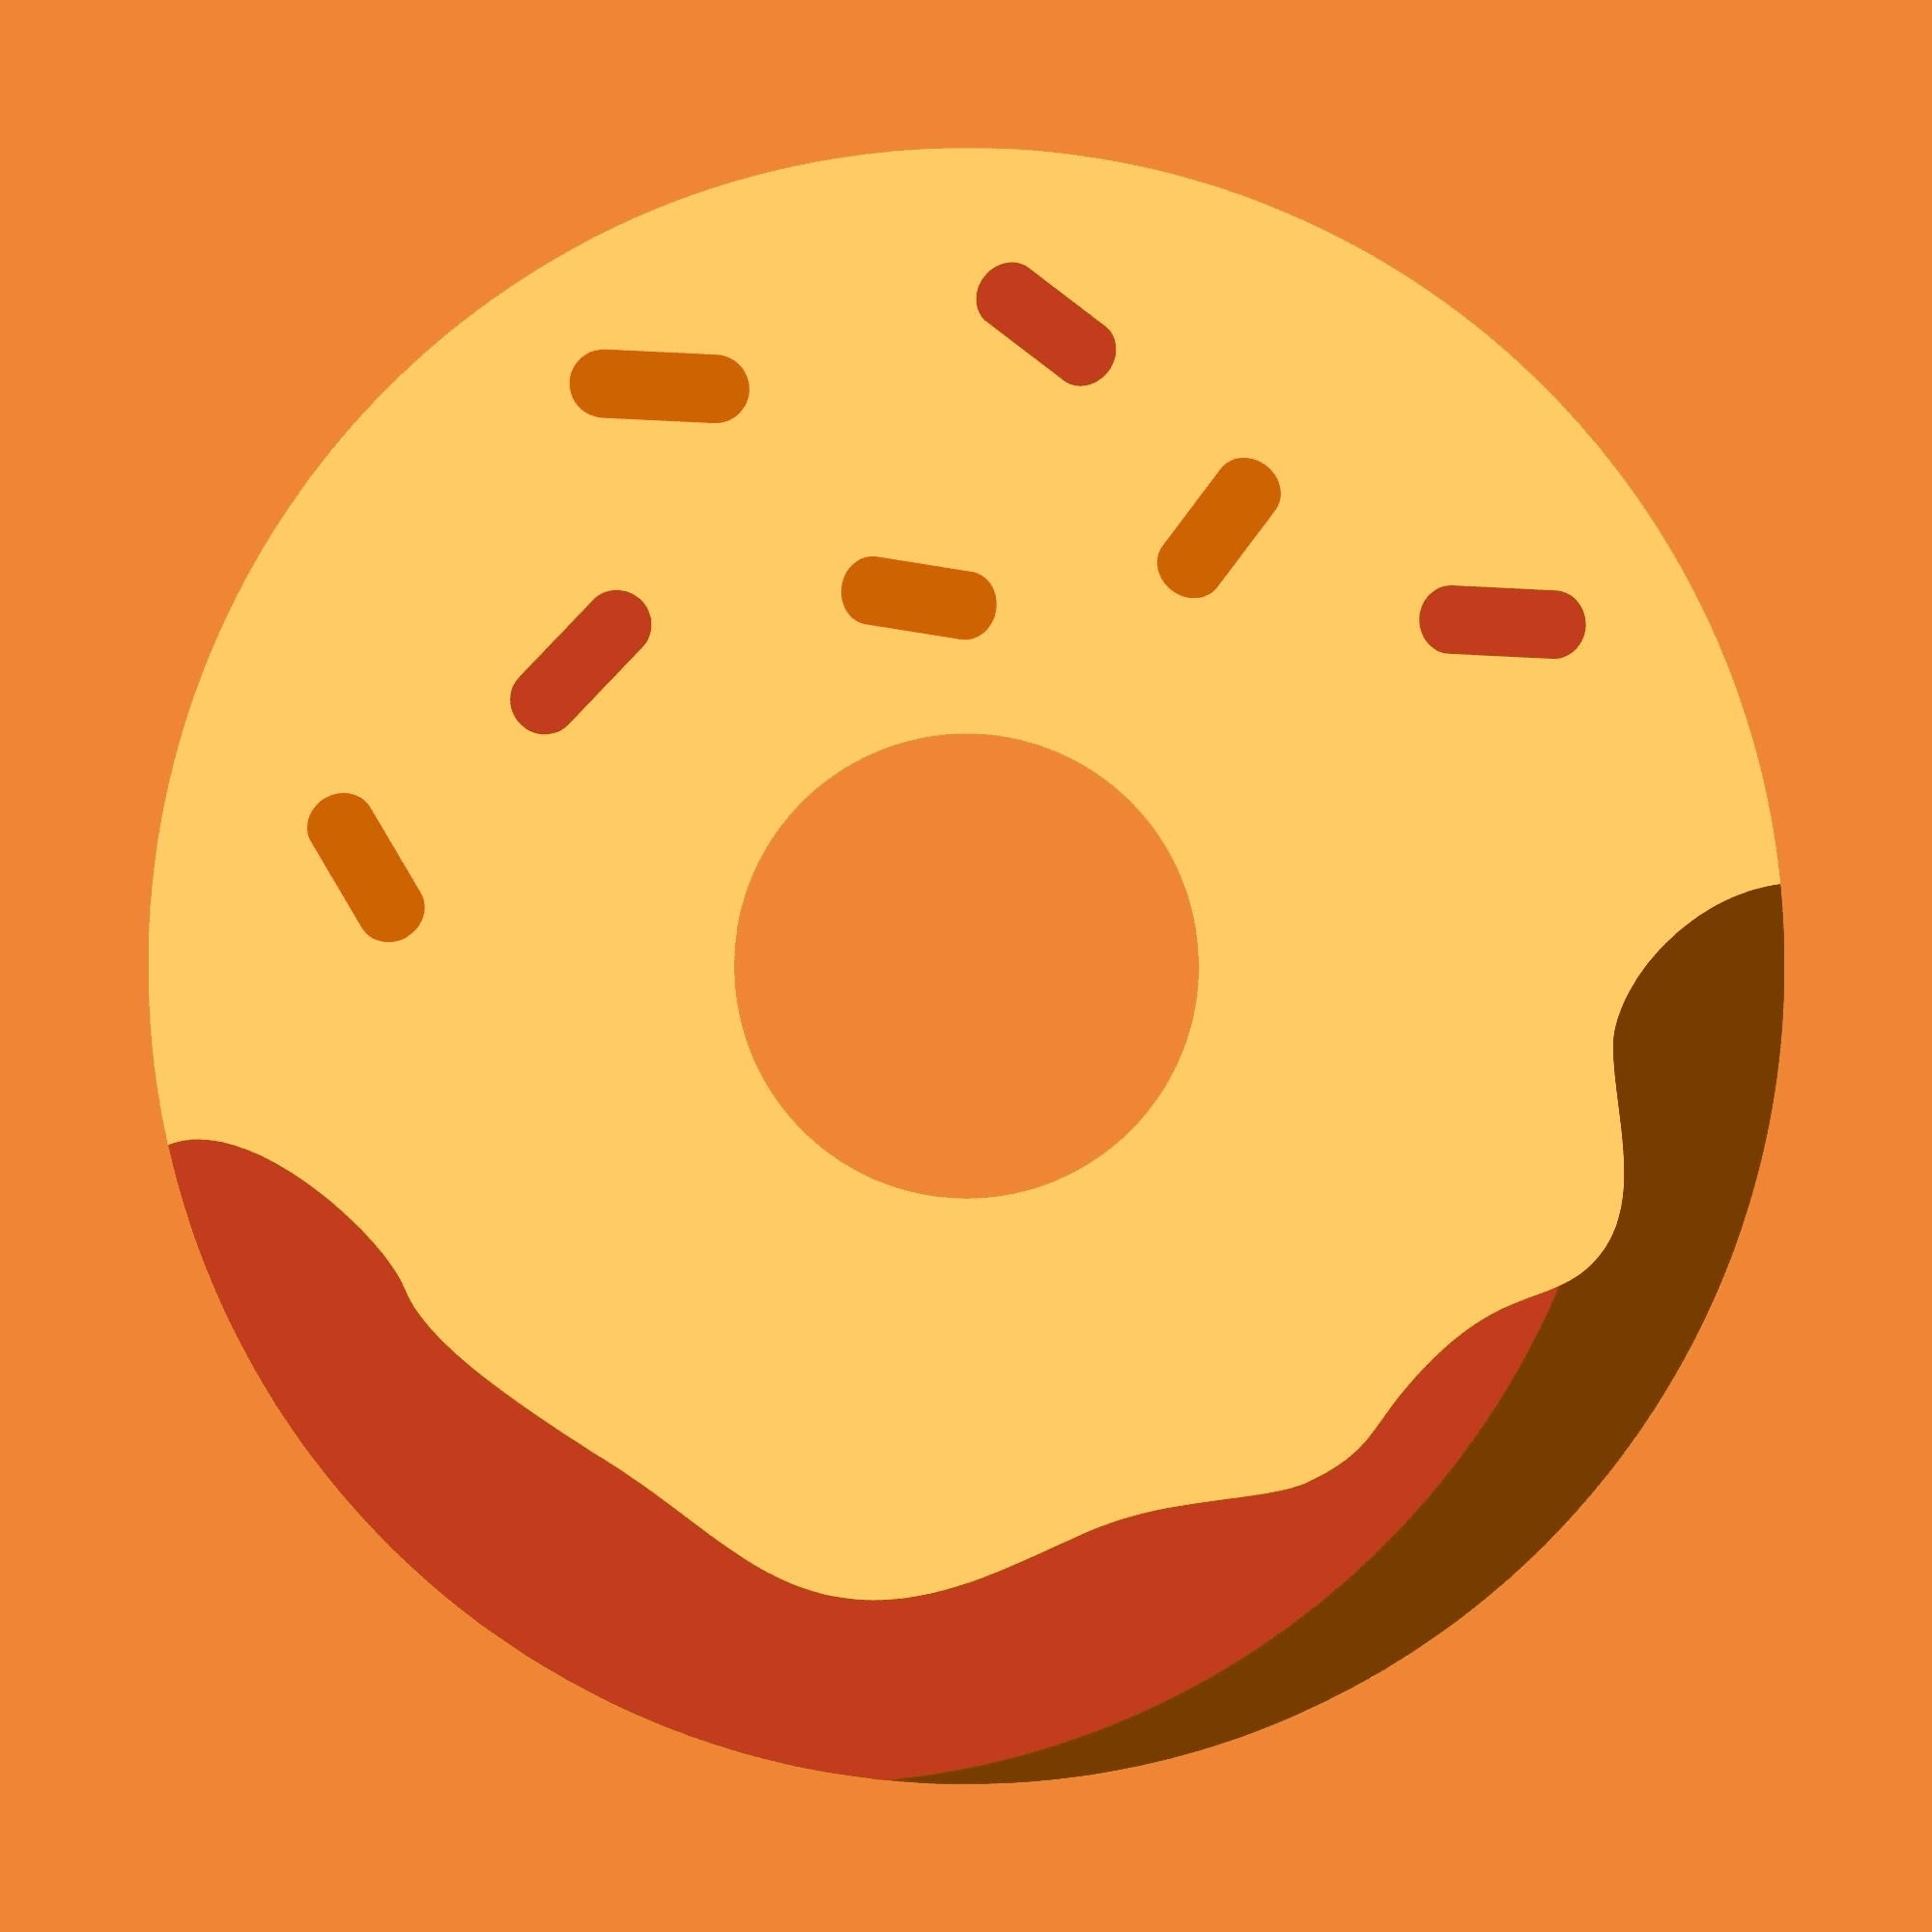 Donut #50 - Poly Donuts